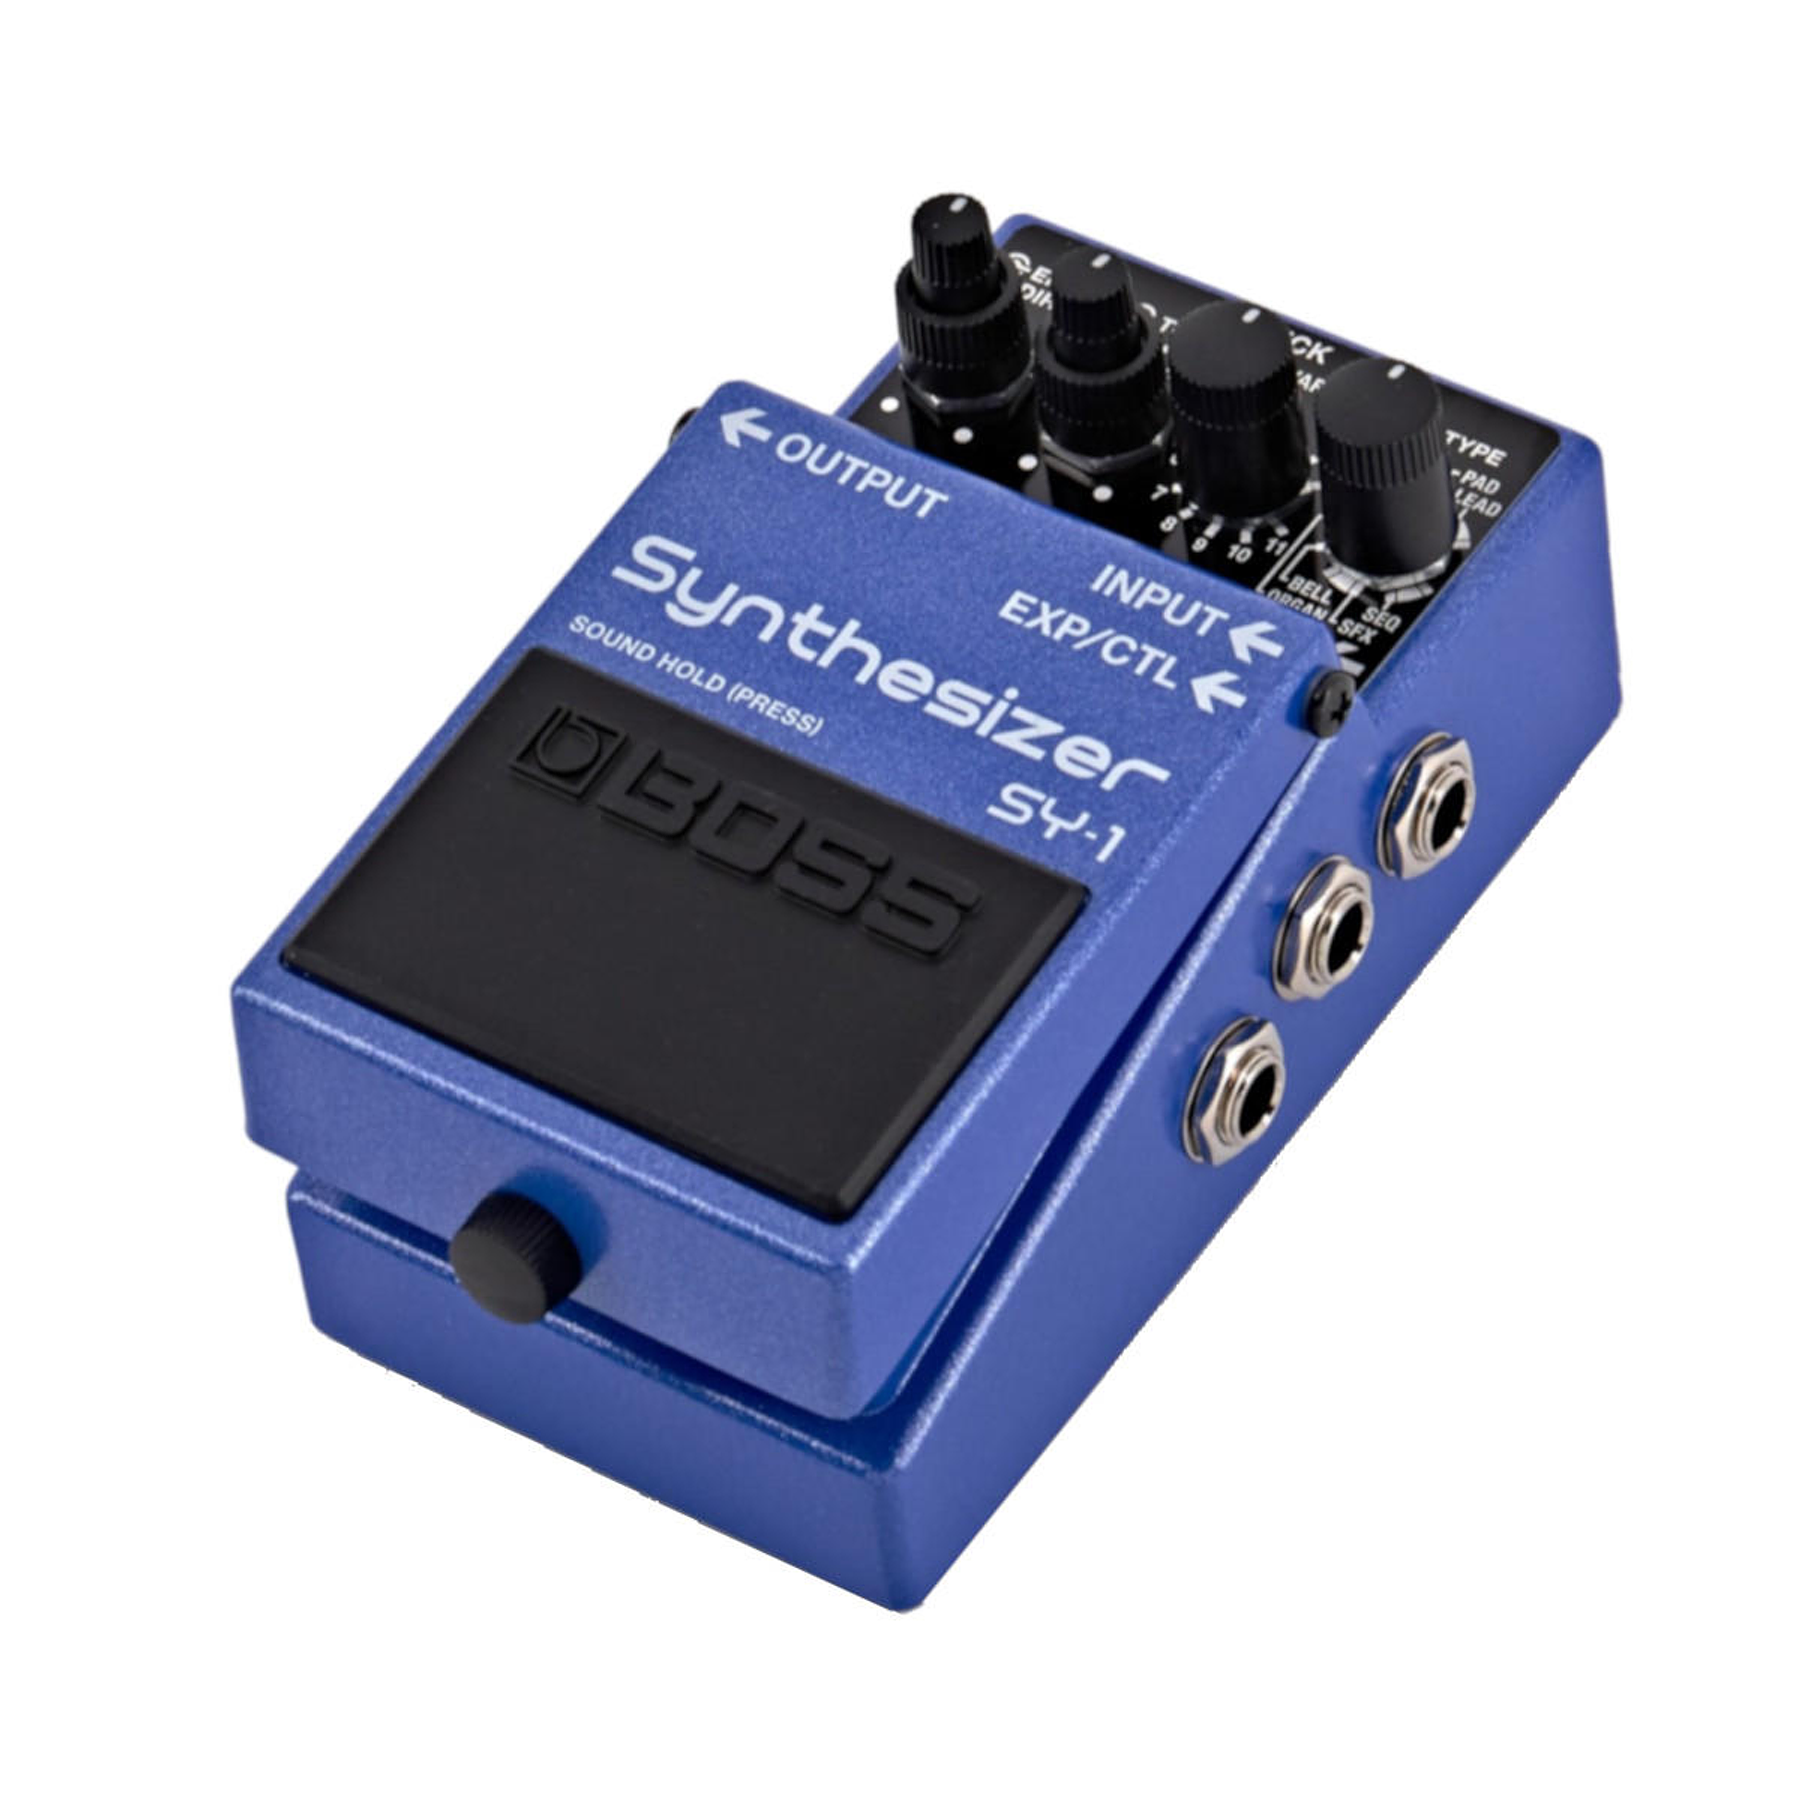 Pedal de efecto Boss SY-1 Synthesizer